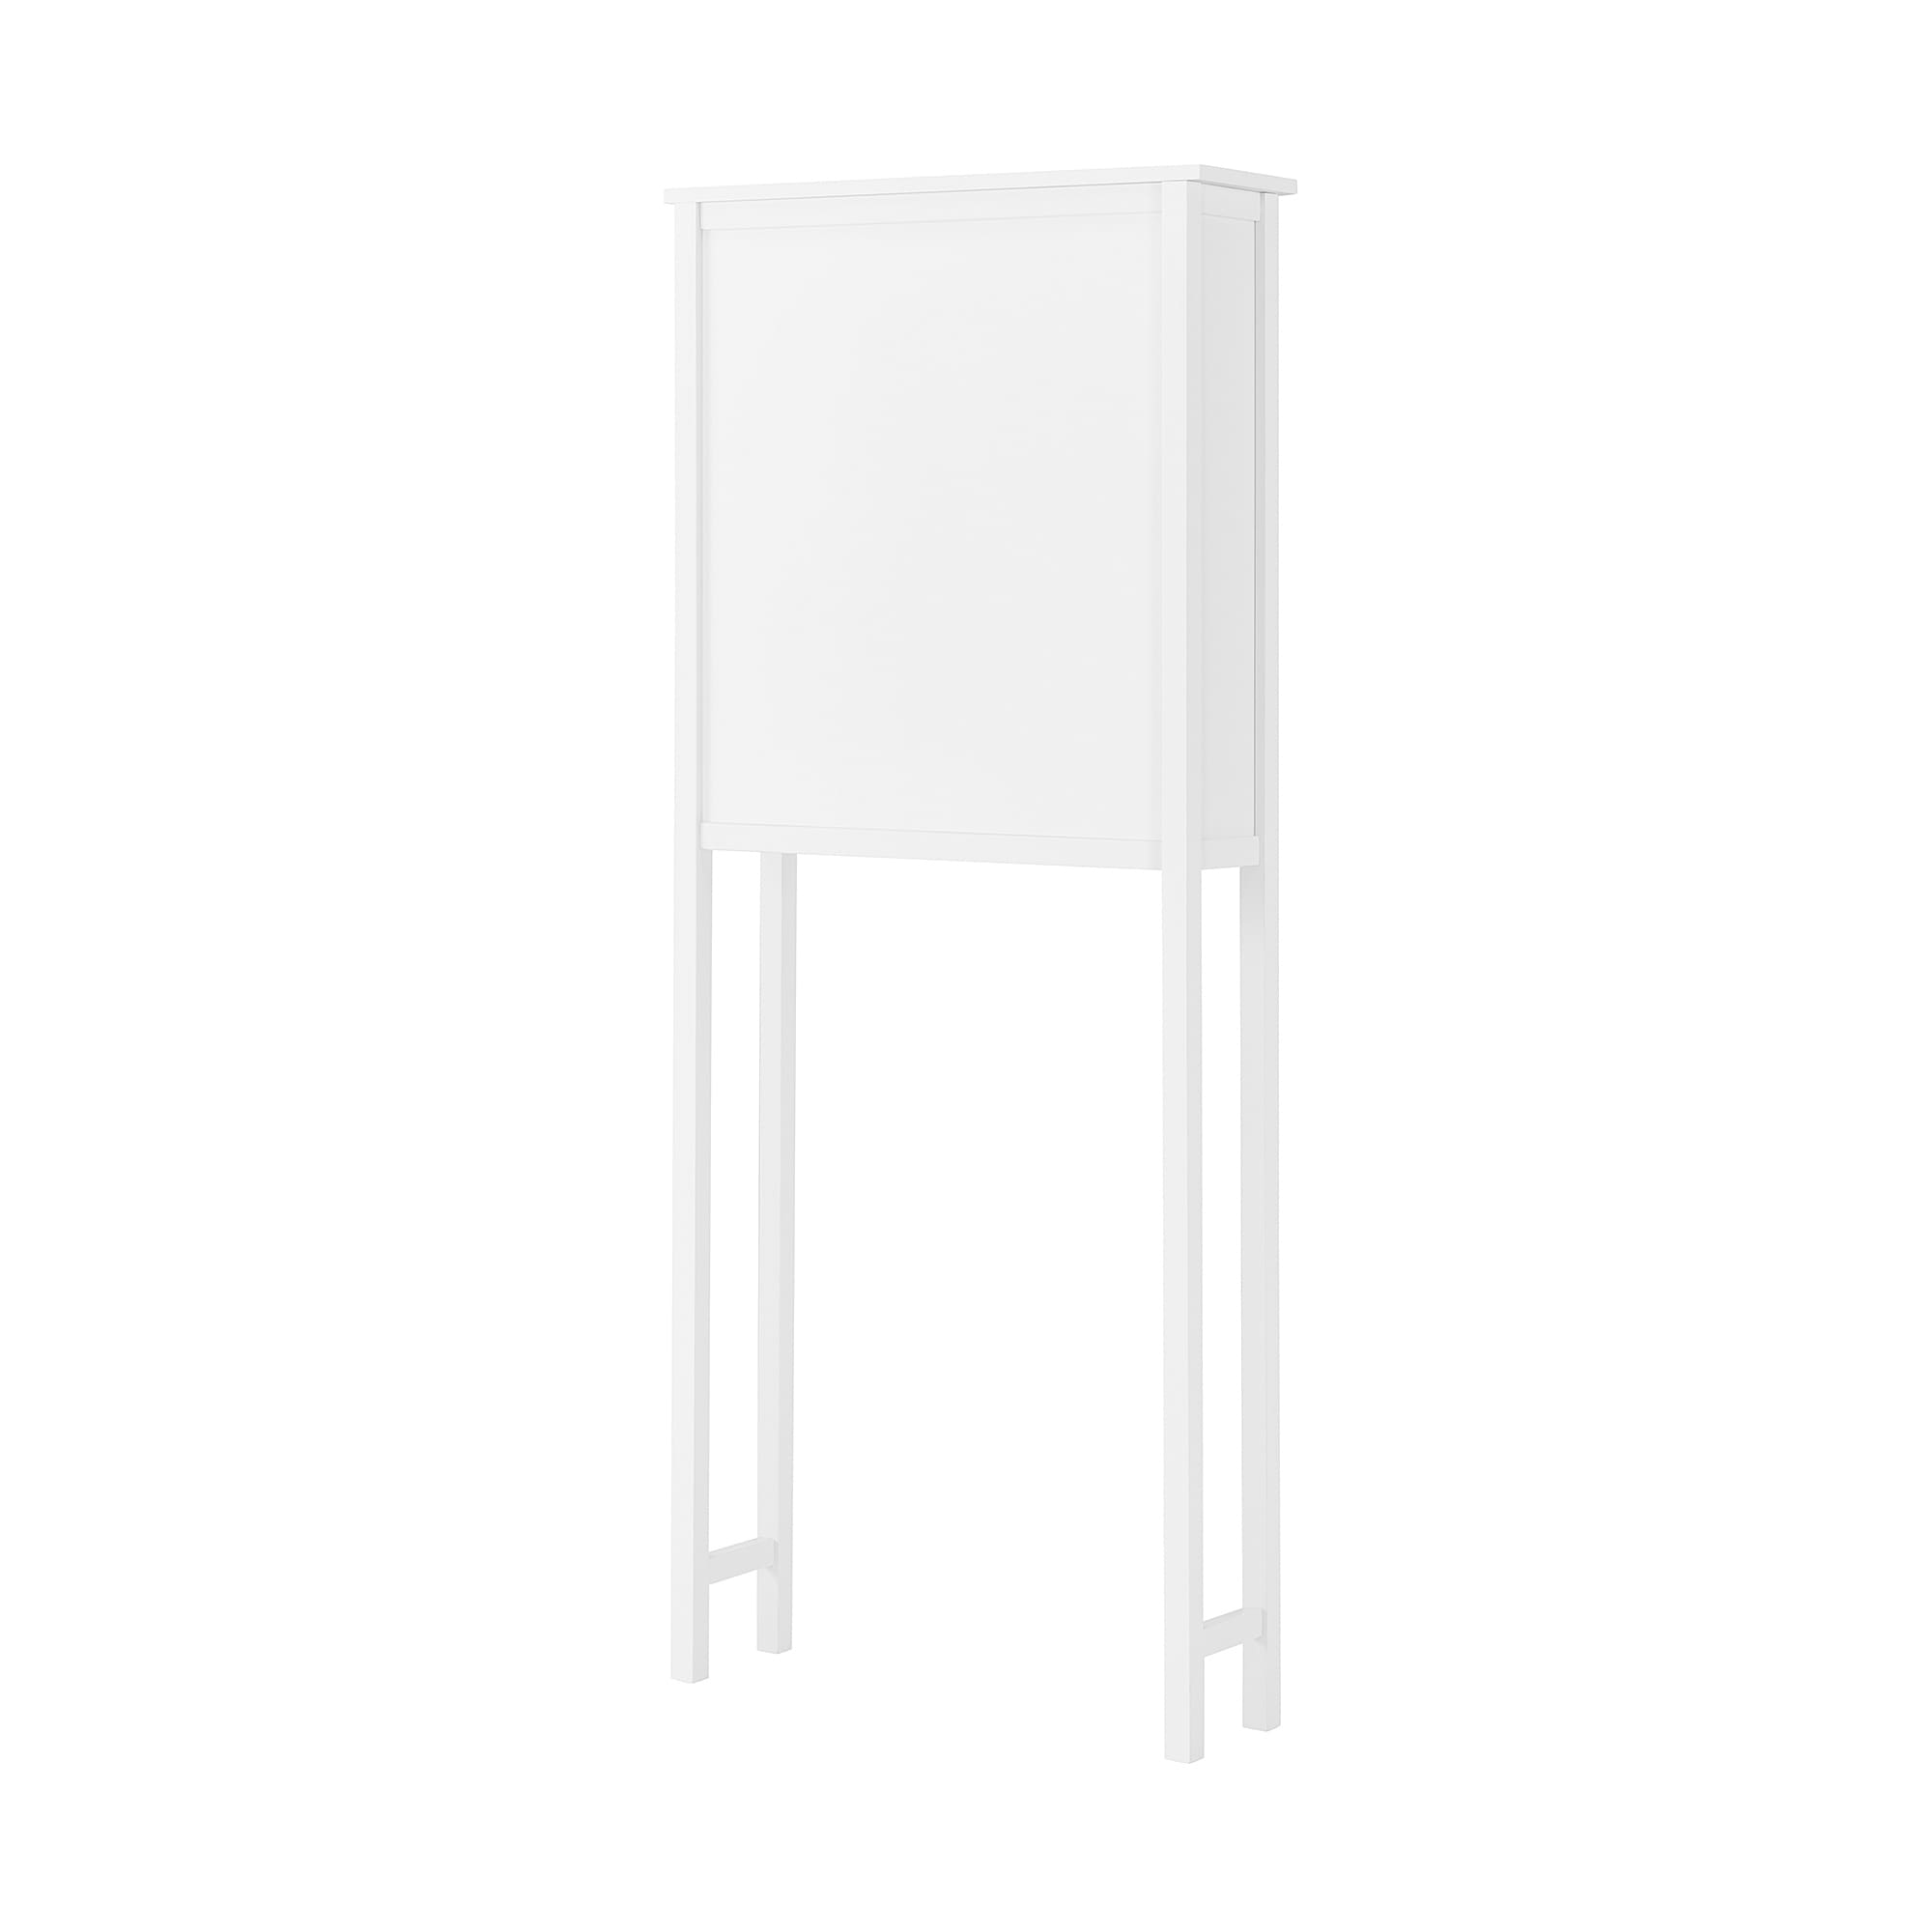 https://ak1.ostkcdn.com/images/products/is/images/direct/1b5f3157502b7dac6fd7bc256dde39089e286ef6/Dover-Over-Toilet-Hutch-with-2-Doors%2C-Wall-Mounted-Bathroom-Storage-Cabinet-with-2-Doors-and-Towel-Rod.jpg